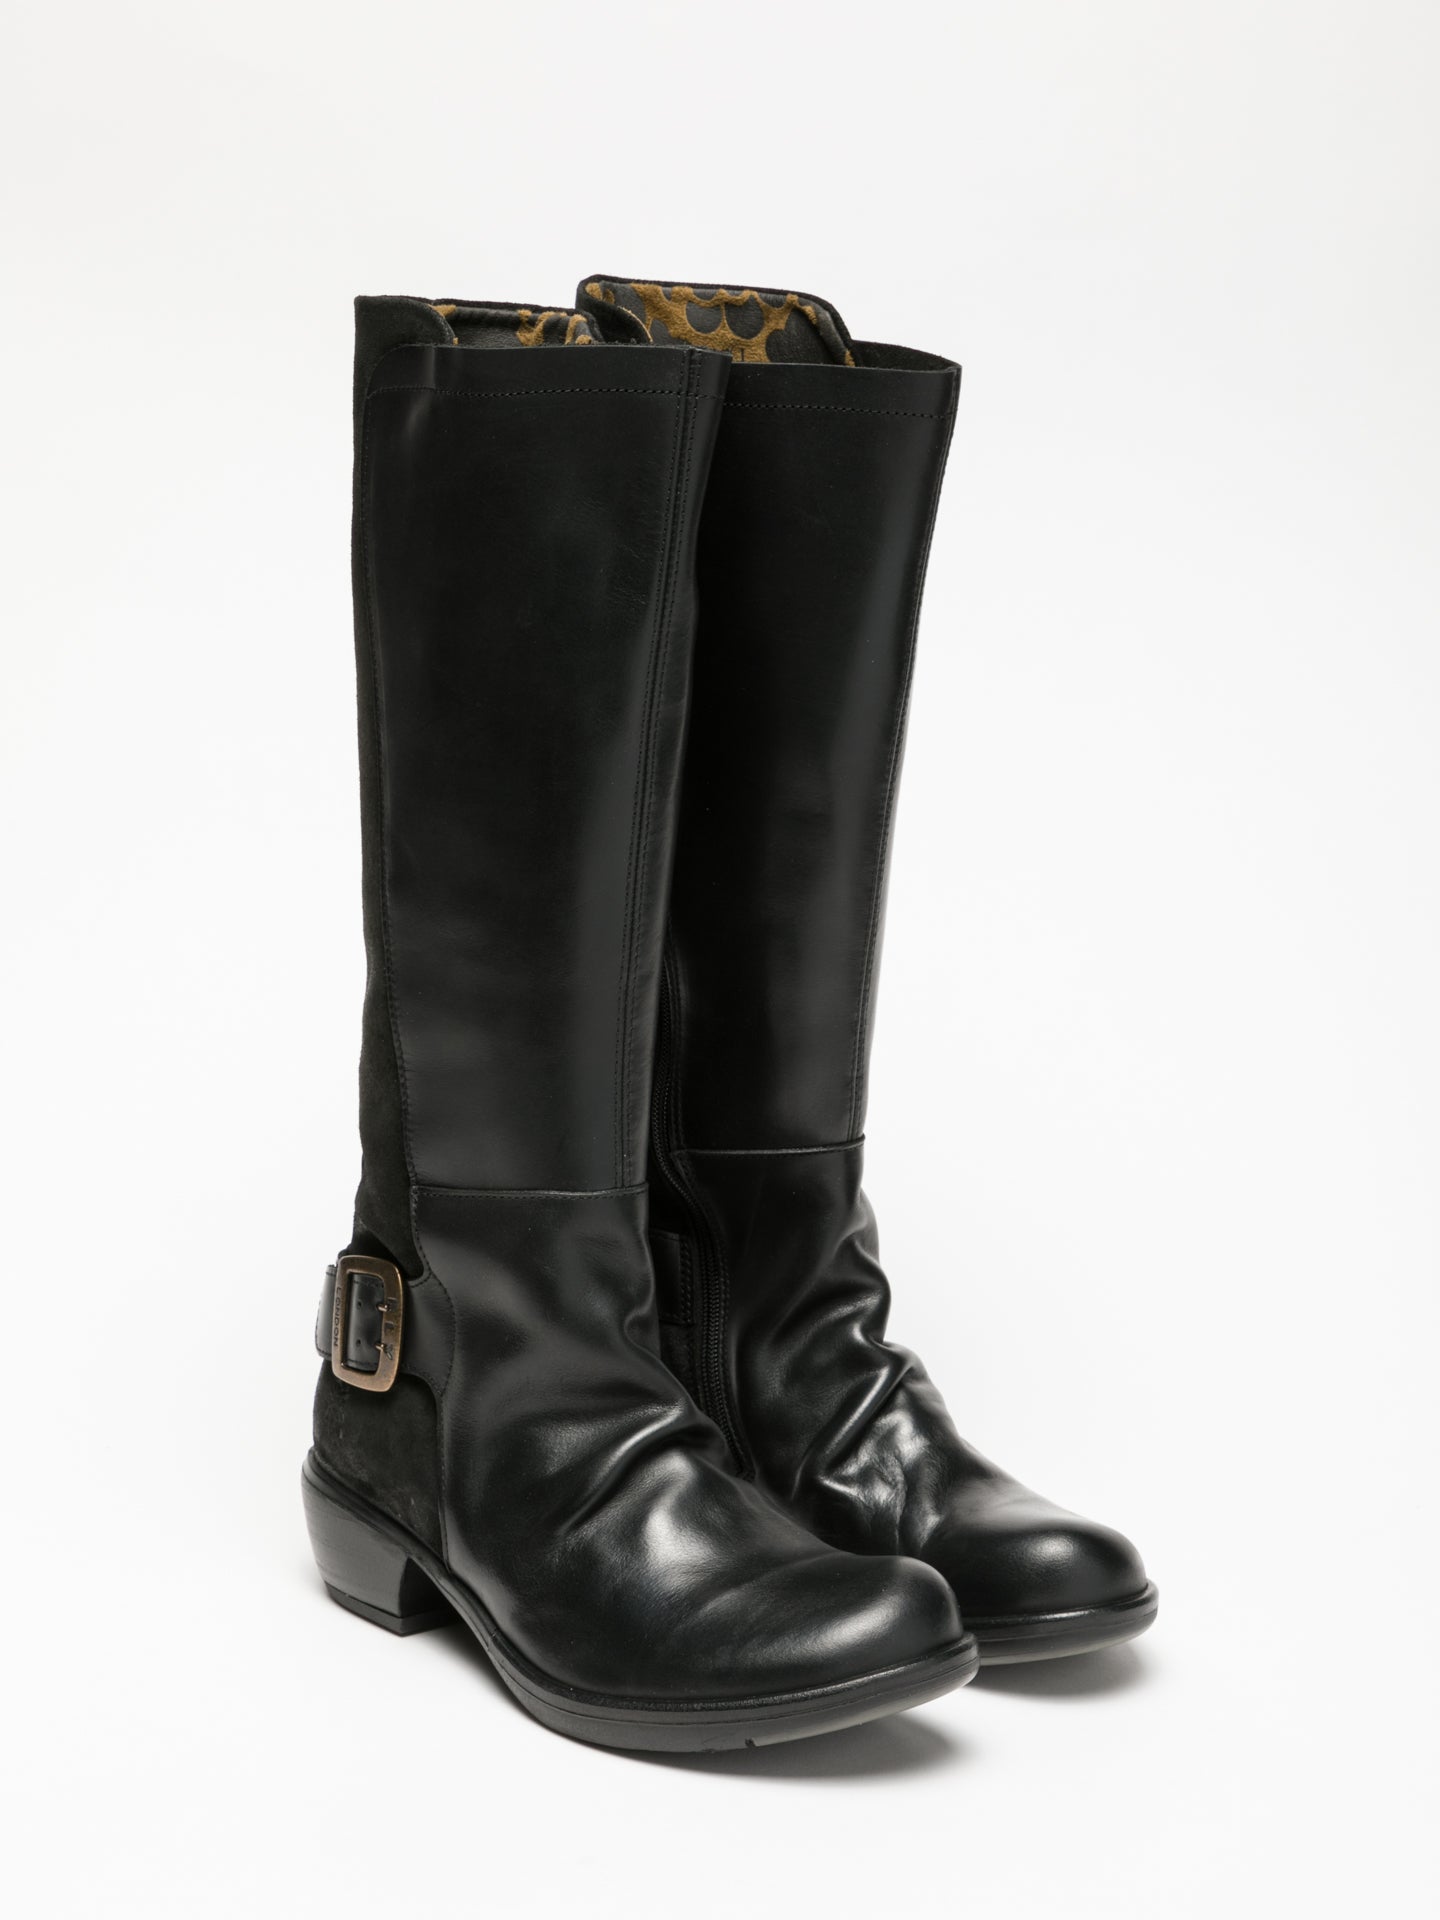 Fly London Black Knee-High Boots